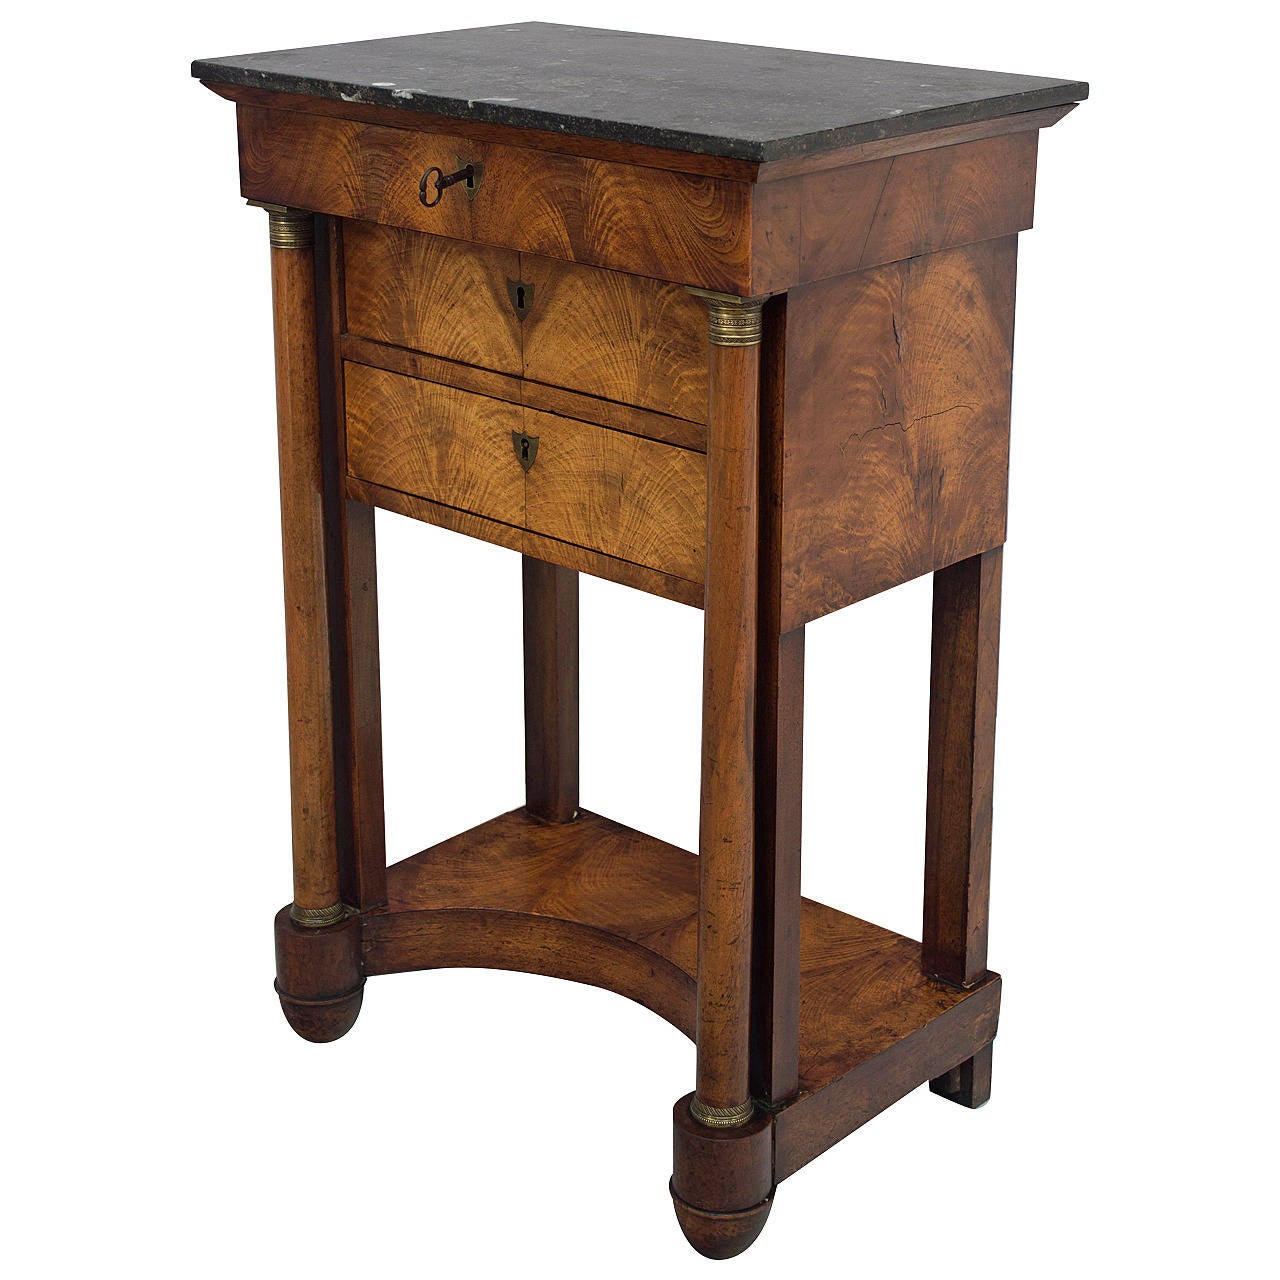 19th century French Empire period walnut side table or nightstand. Bookmatched veneer finished on all four sides. Two dovetailed drawers beneath a hinged marble top opening to reveal small compartments. Beautiful solid walnut columns with bronze